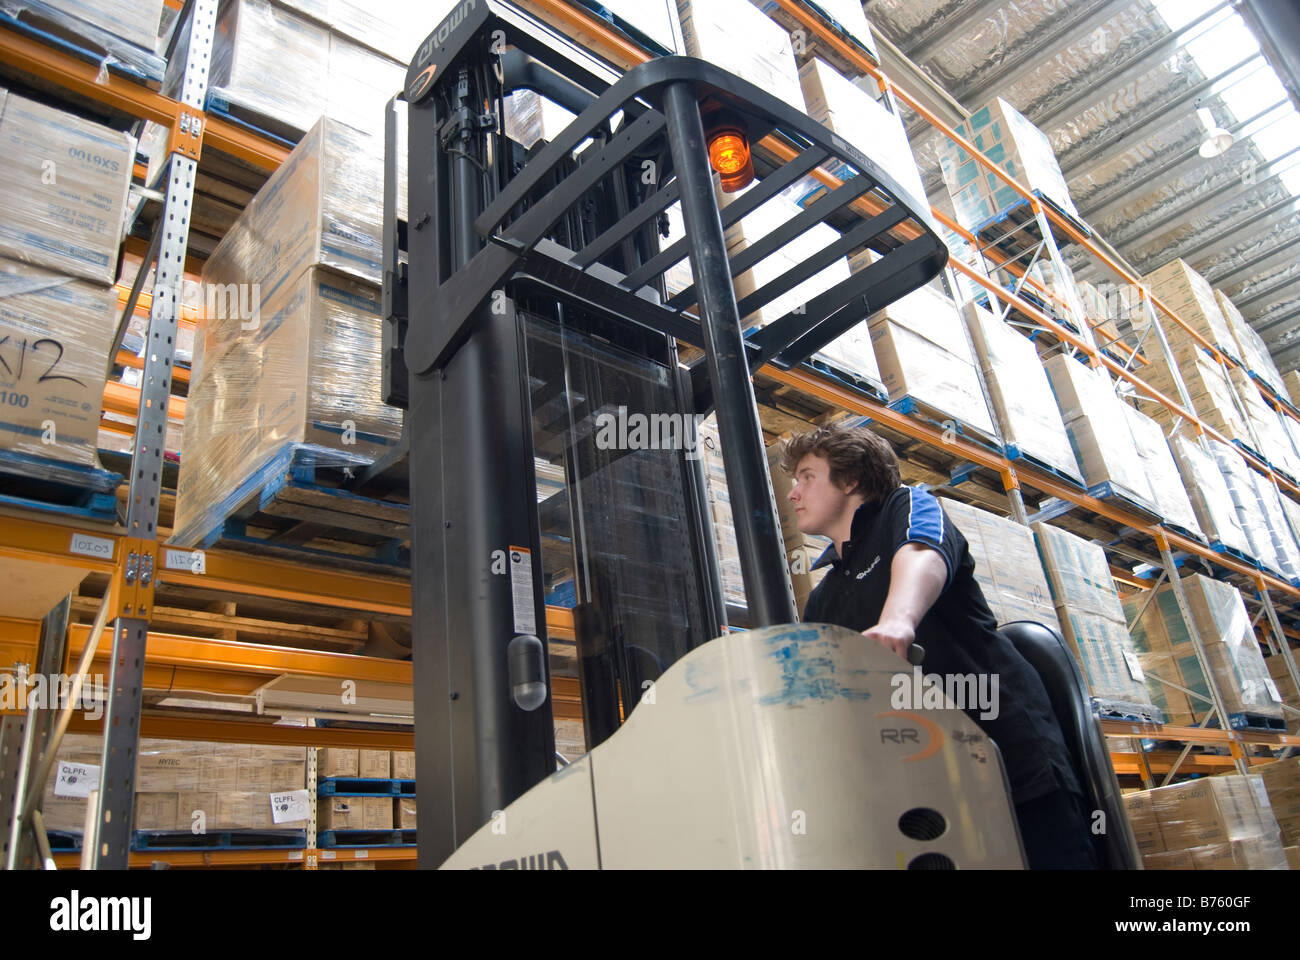 Young man using forklift in large warehouse, Online Distribution, Port Hills Road, Christchurch, Canterbury, New Zealand Stock Photo